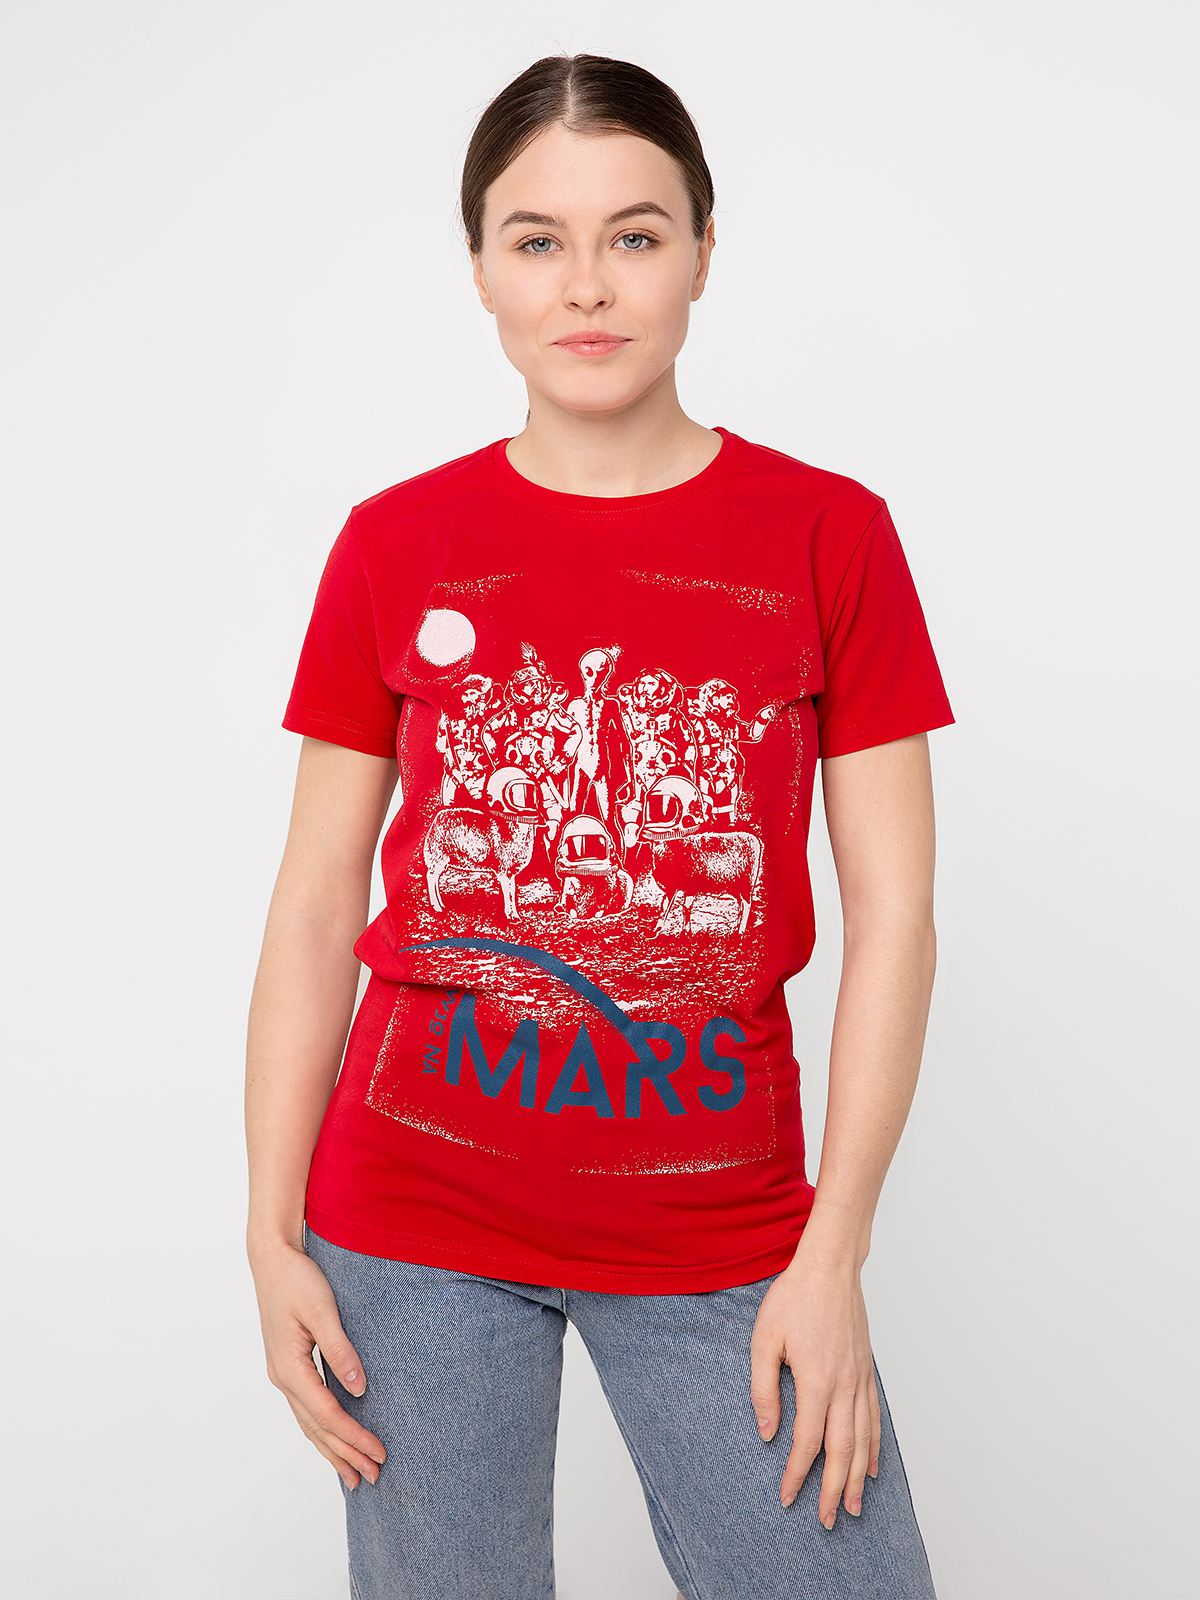 Women's T-Shirt Mars. Color red. Material: 95% cotton, 5% spandex.